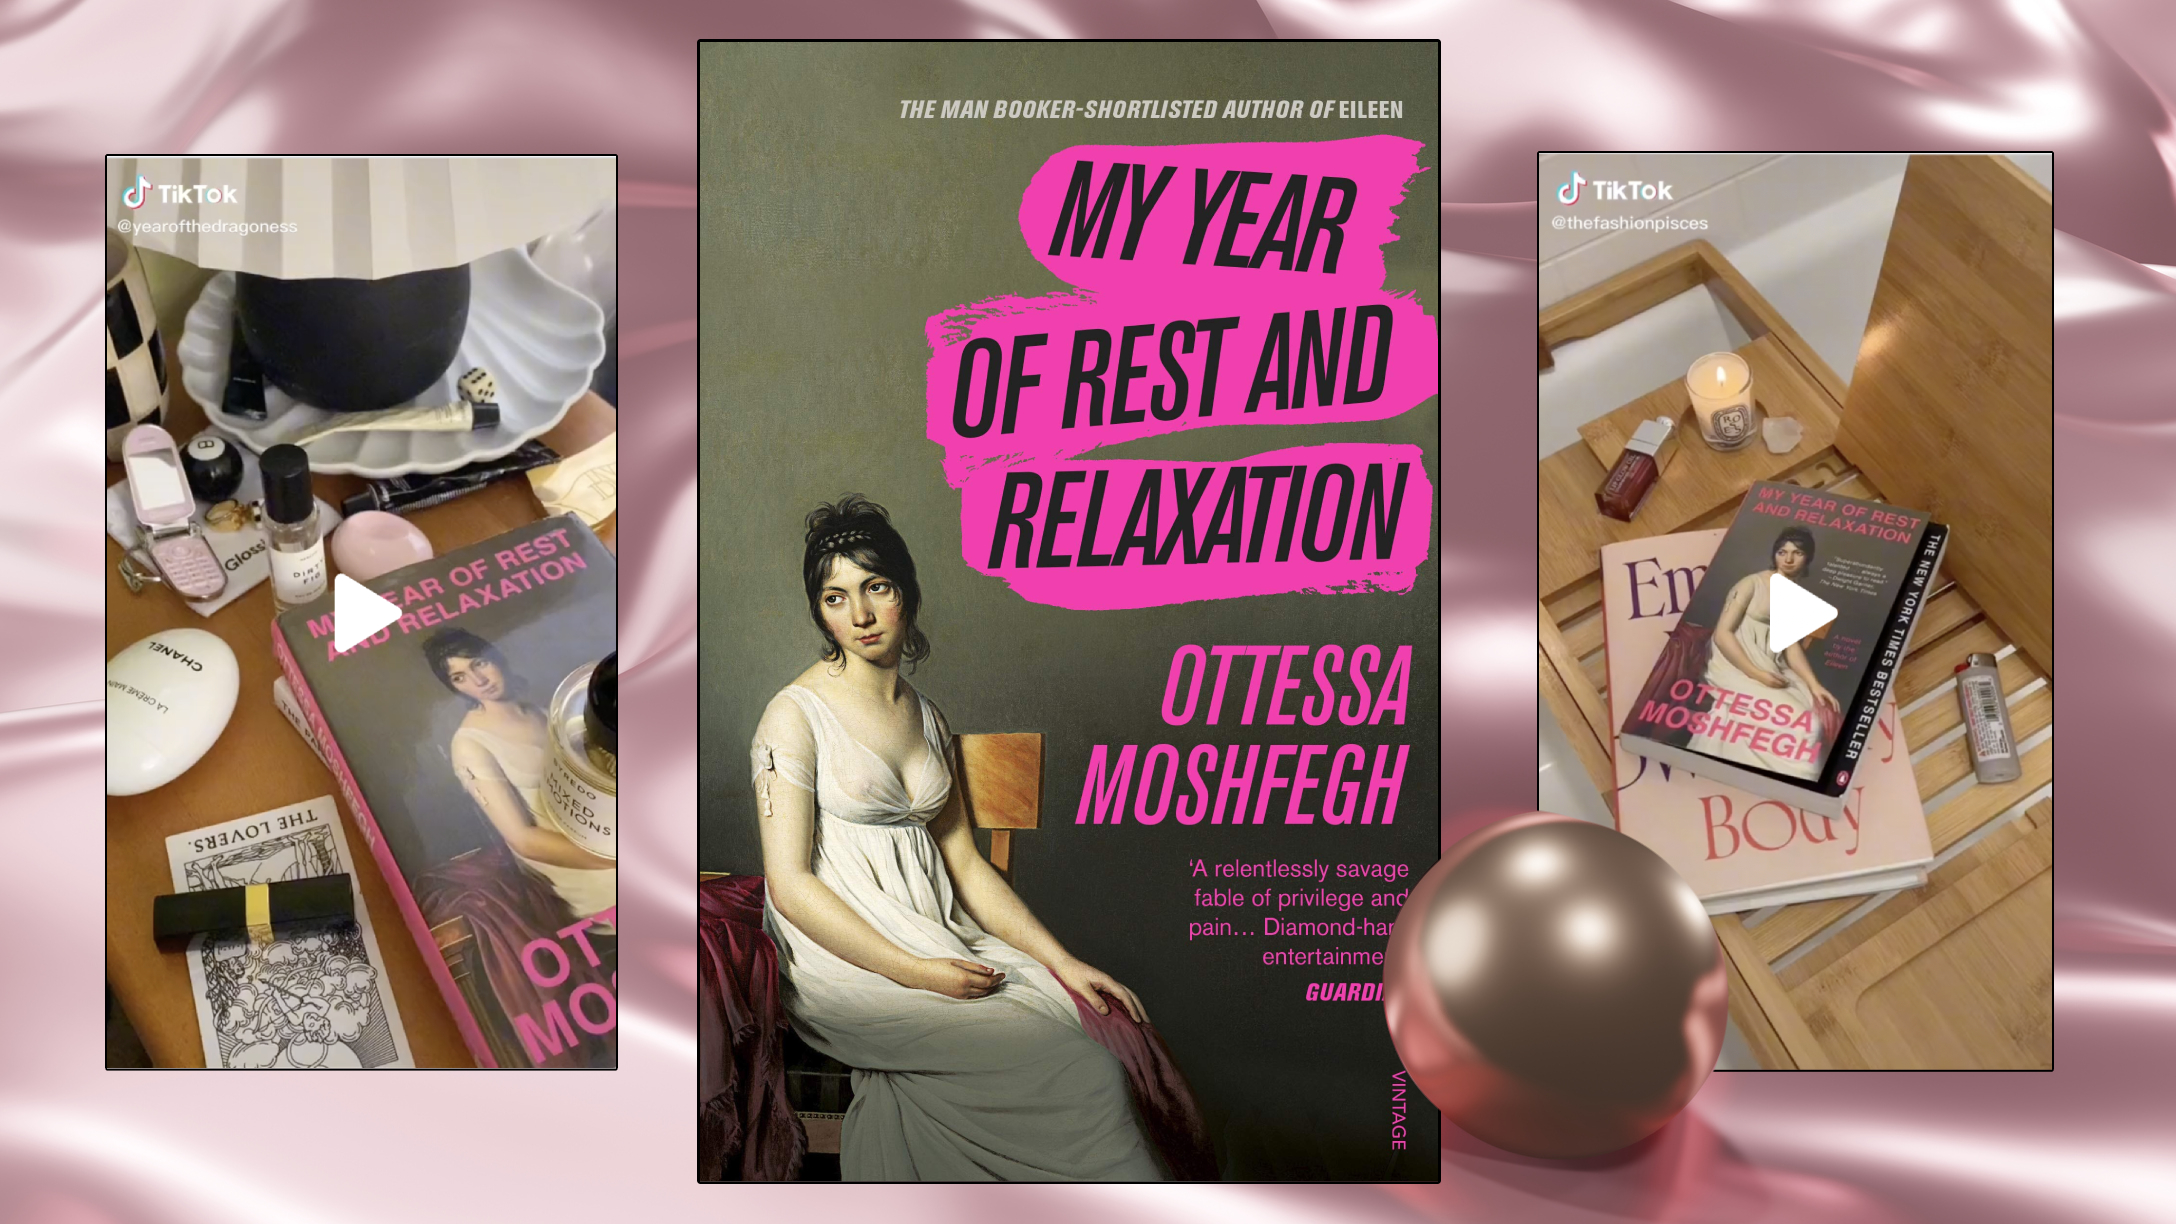 How 'My Year of Rest and Relaxation' Became an Unlikely Aesthetic